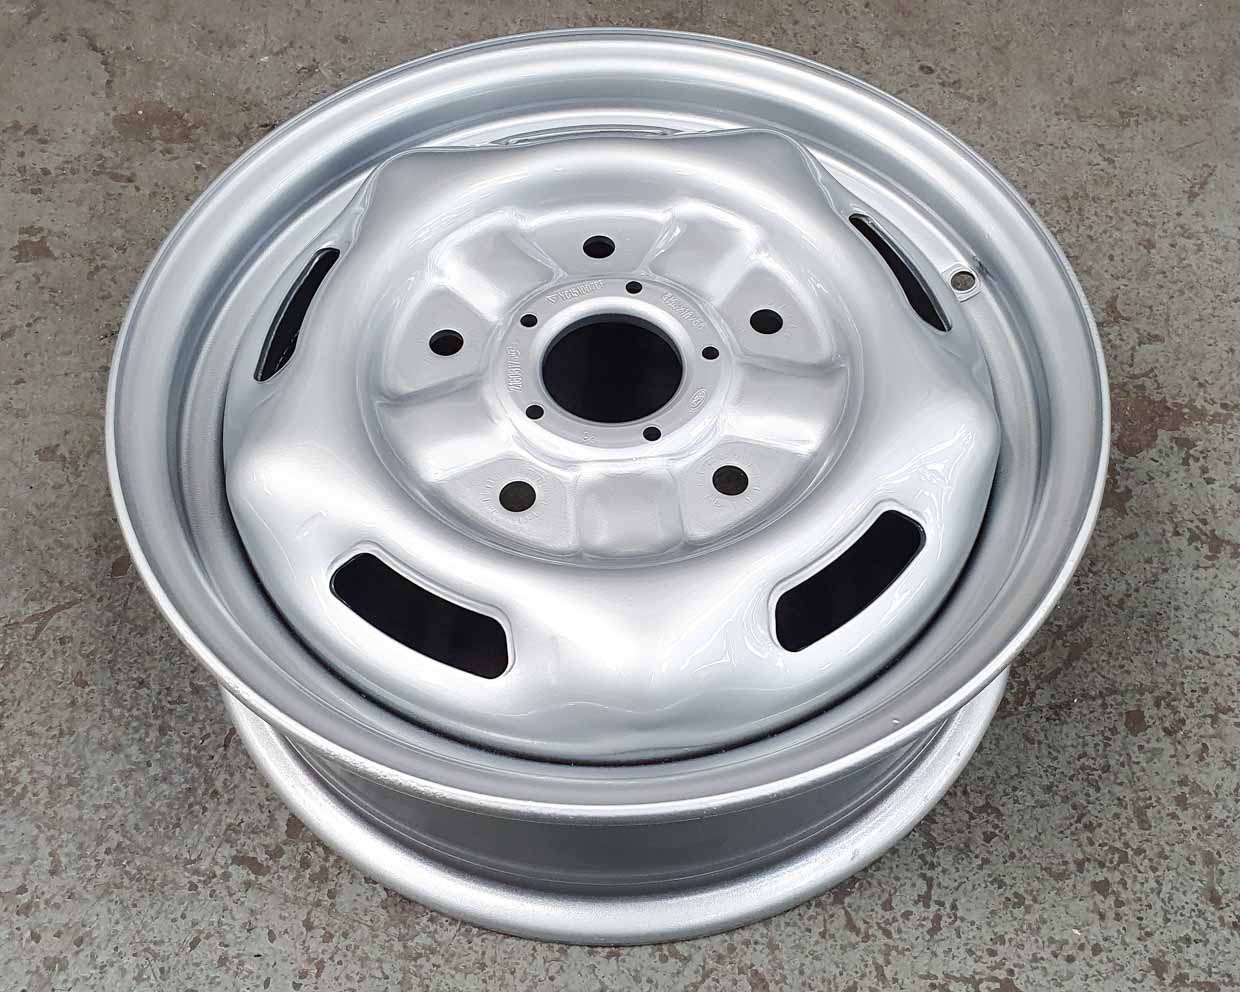 The steel wheel has been refurbished and powder coated in brilliant silver colour.